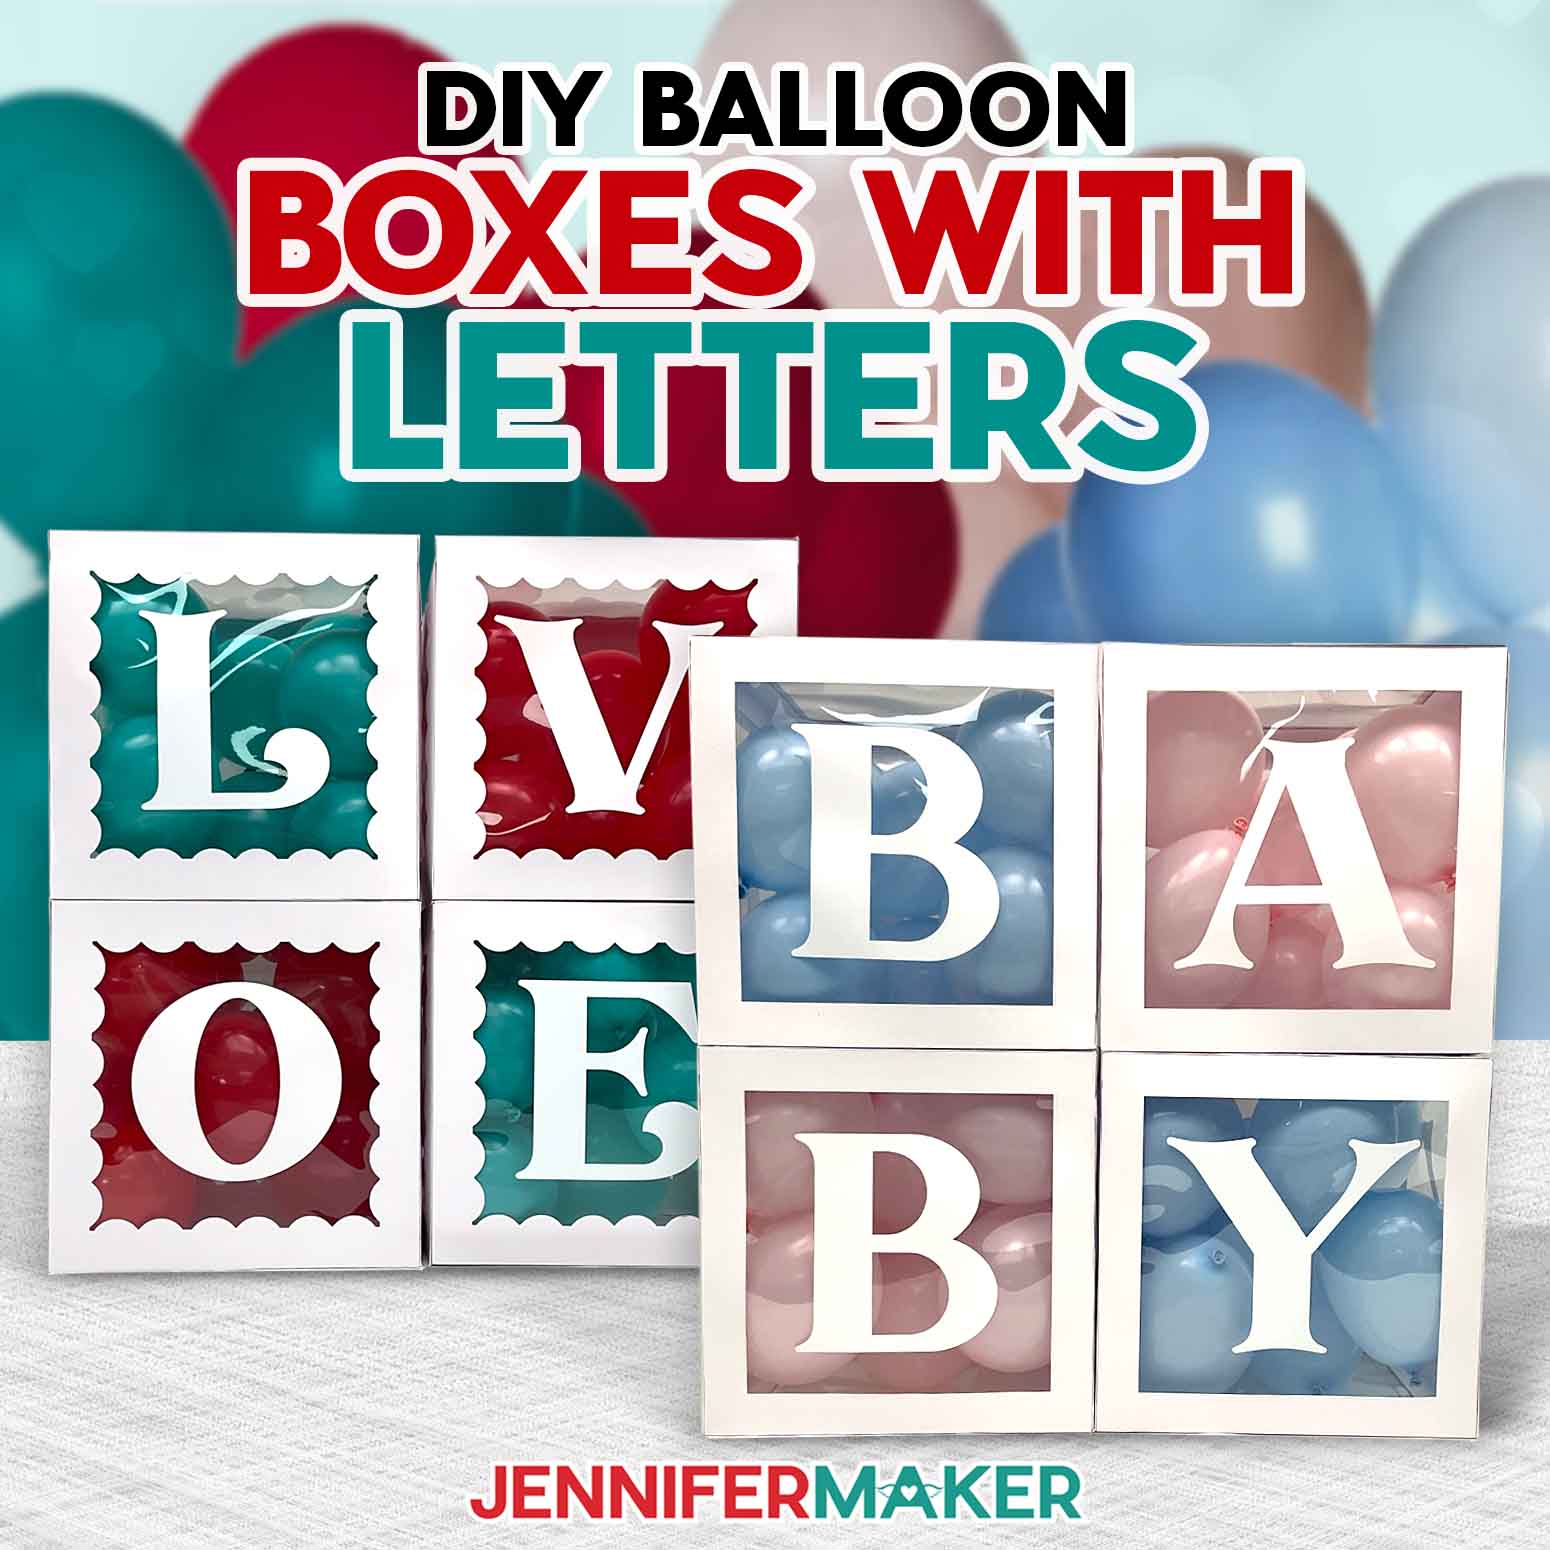 DIY Balloon Boxes With Letters: How to Make Your Own!